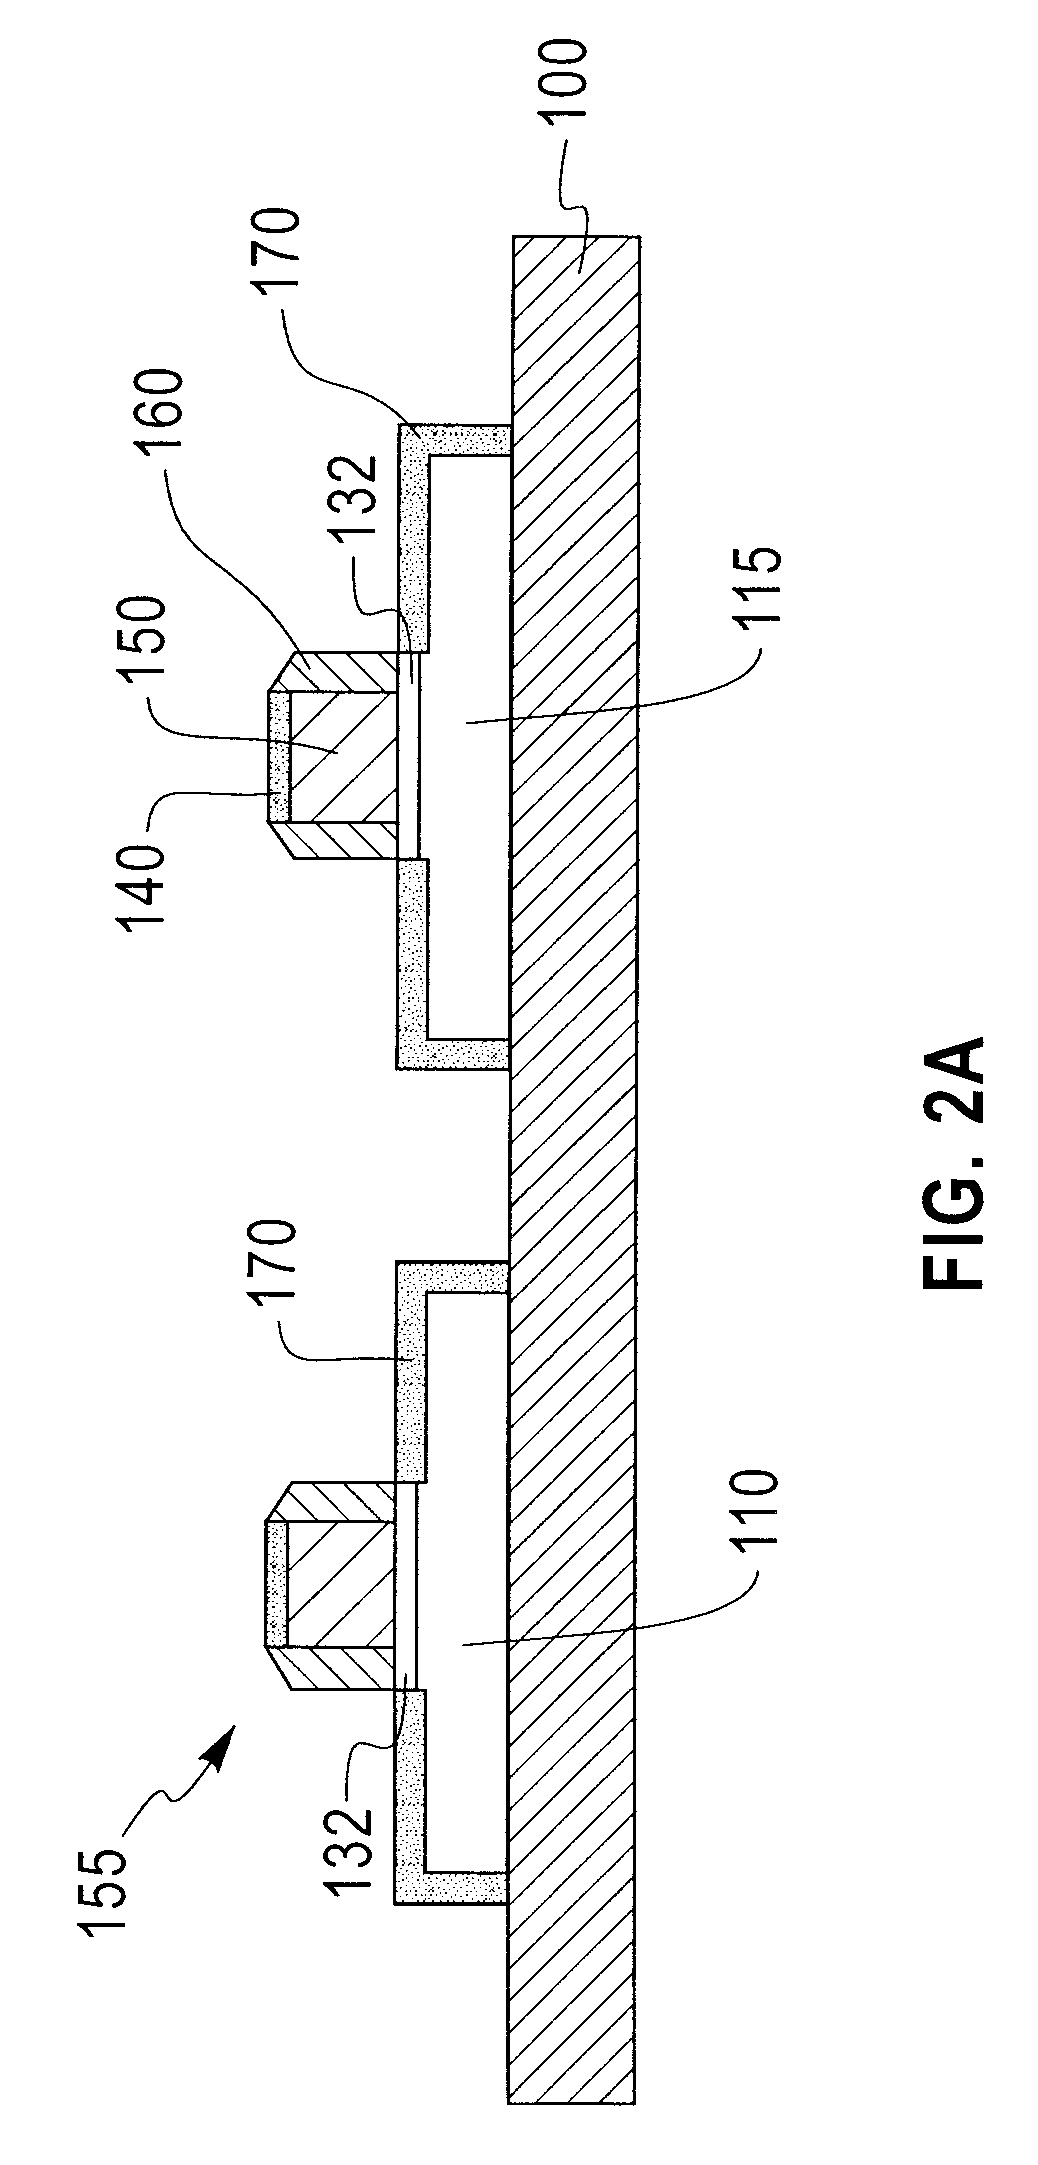 Method and structure to reduce contact resistance on thin silicon-on-insulator device